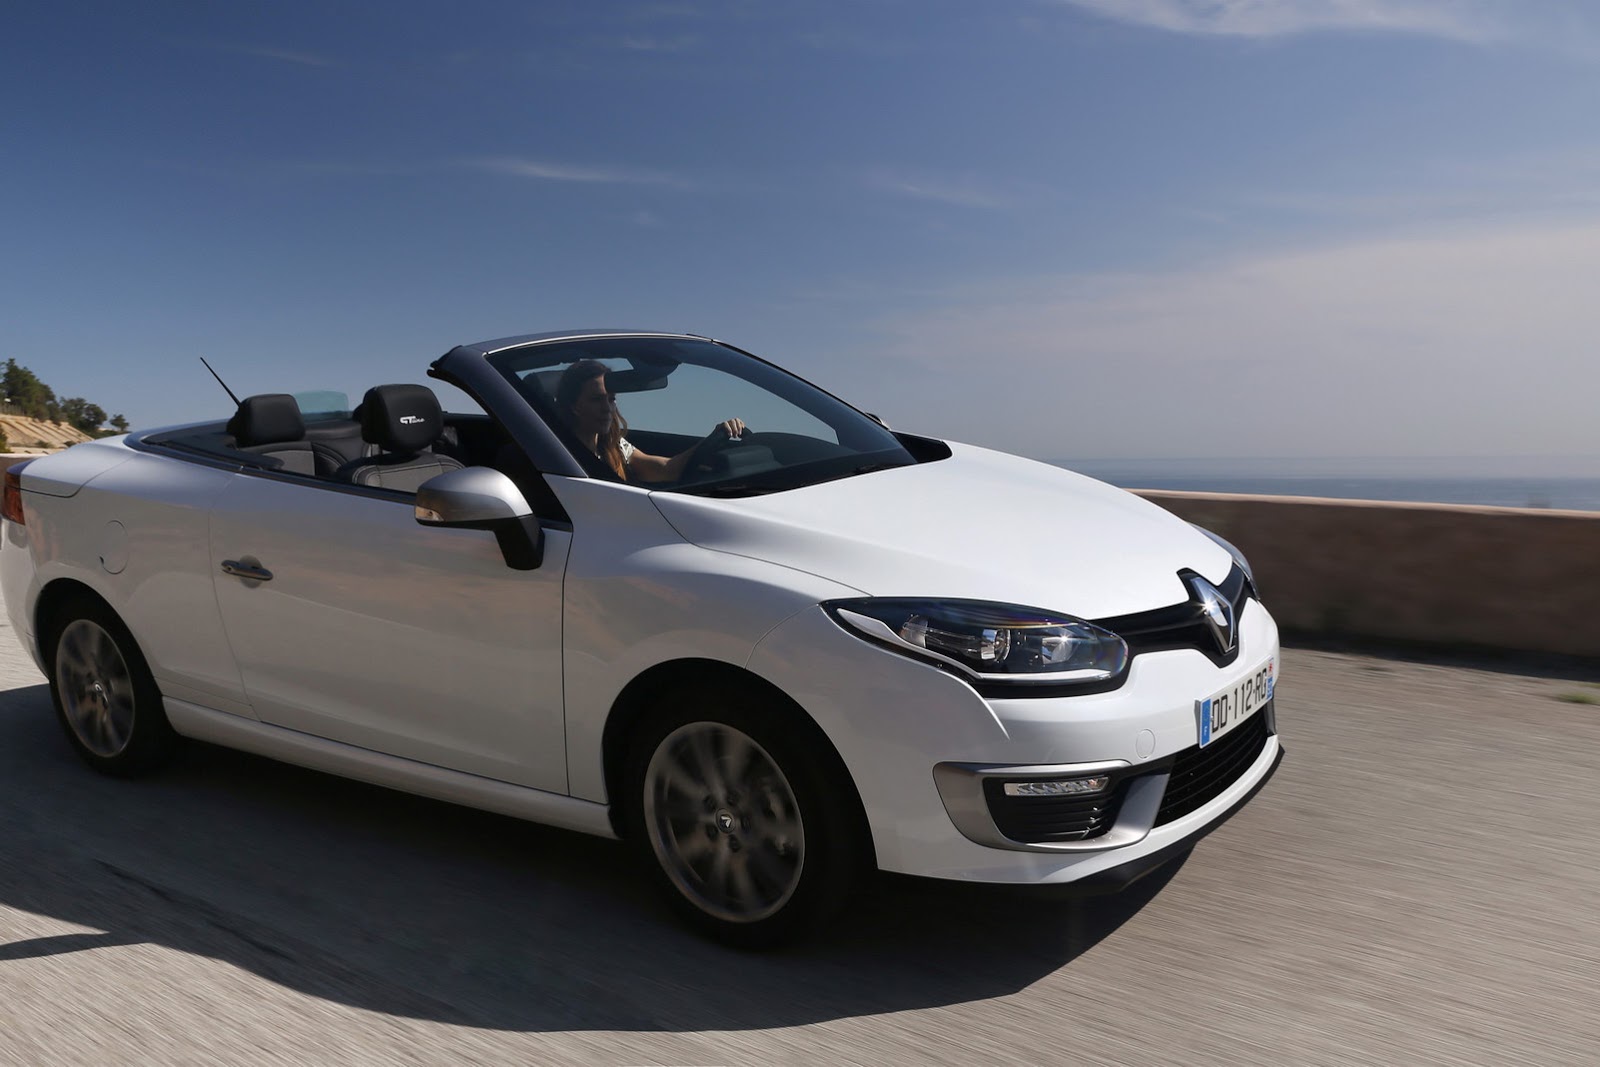 Renault Launches Facelifted Megane CoupeCabriolet with